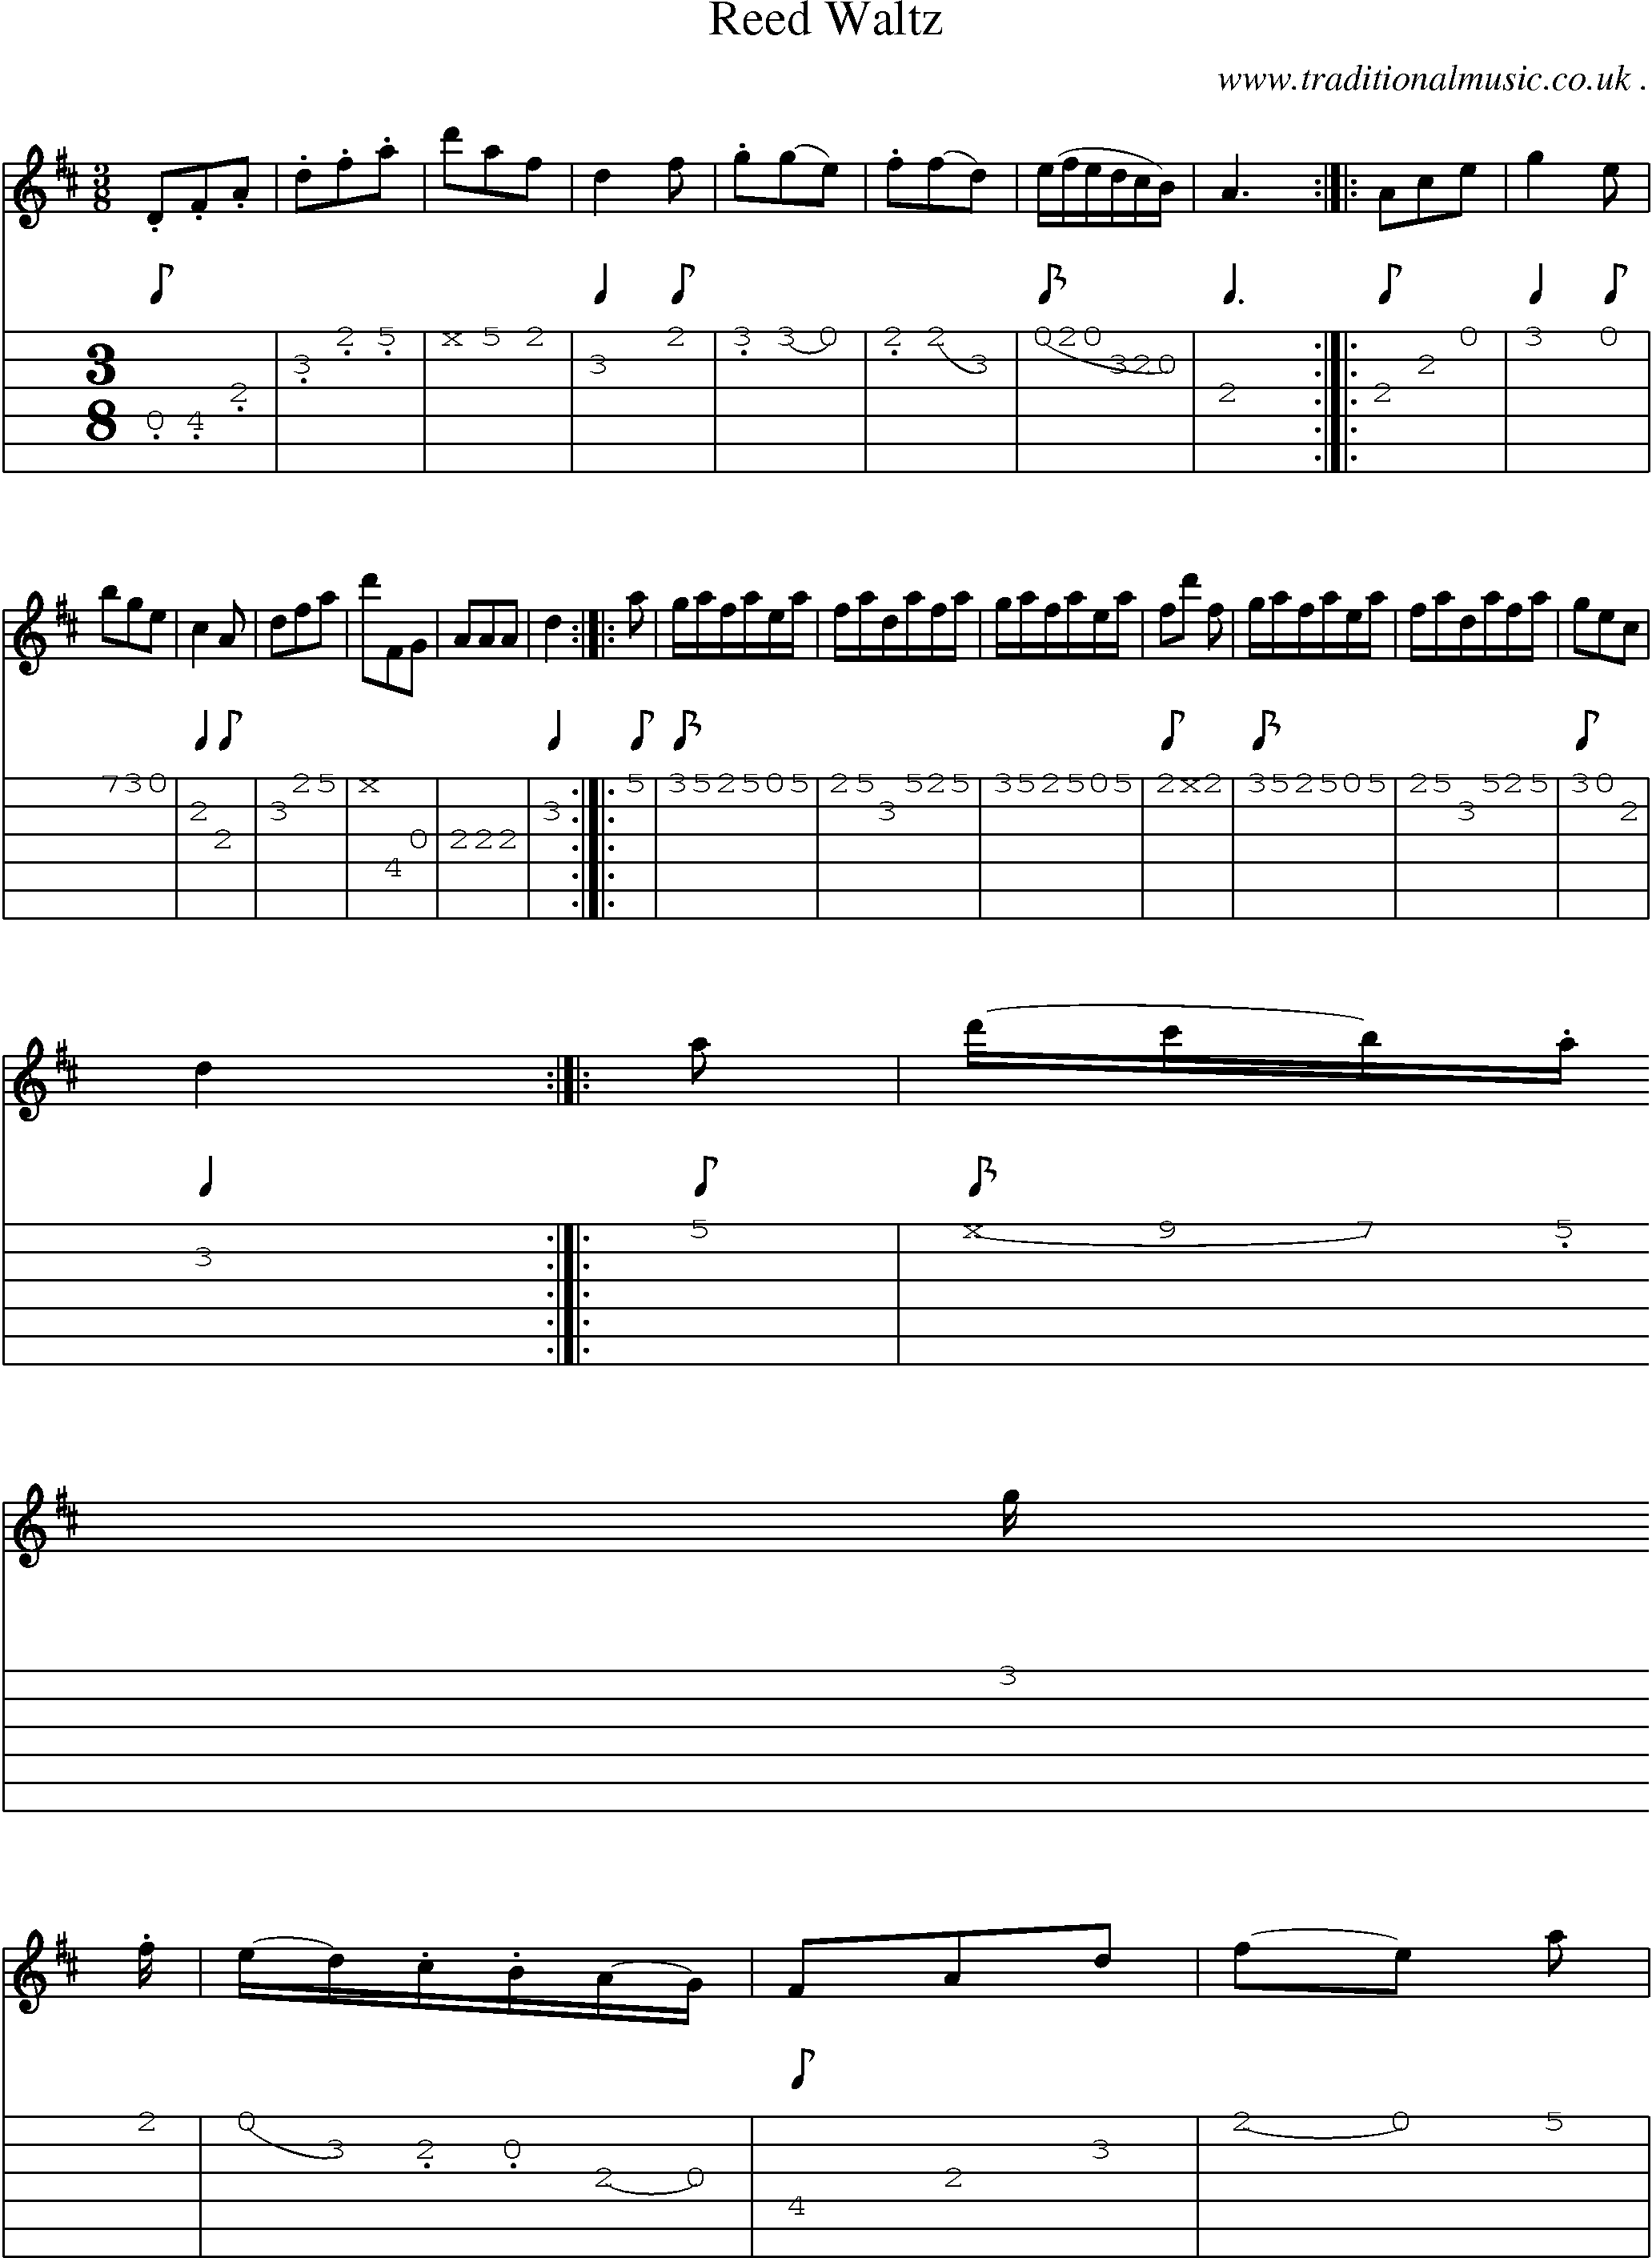 Sheet-Music and Guitar Tabs for Reed Waltz